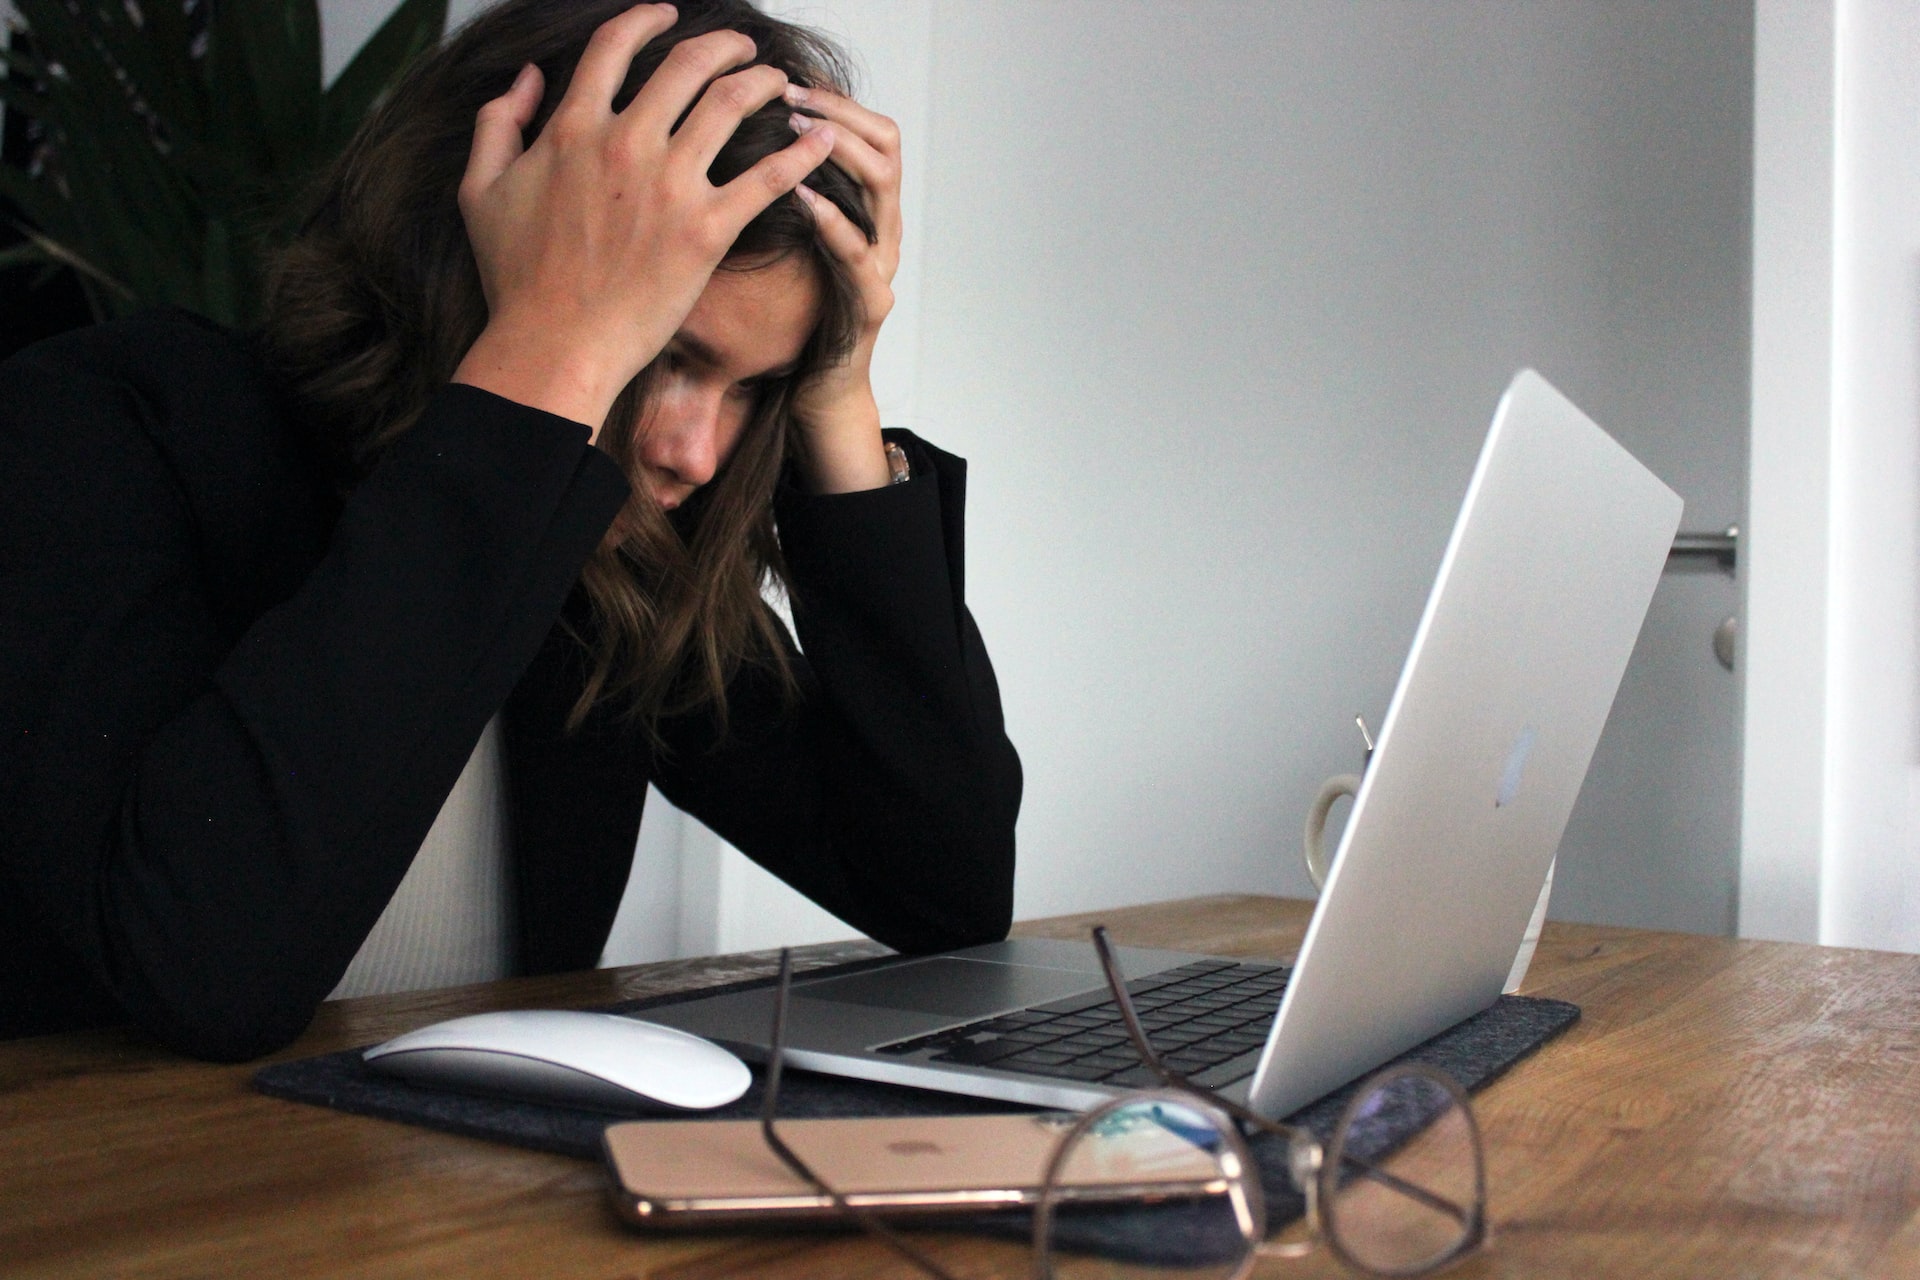 A woman looking stressed and frustrated at a laptop